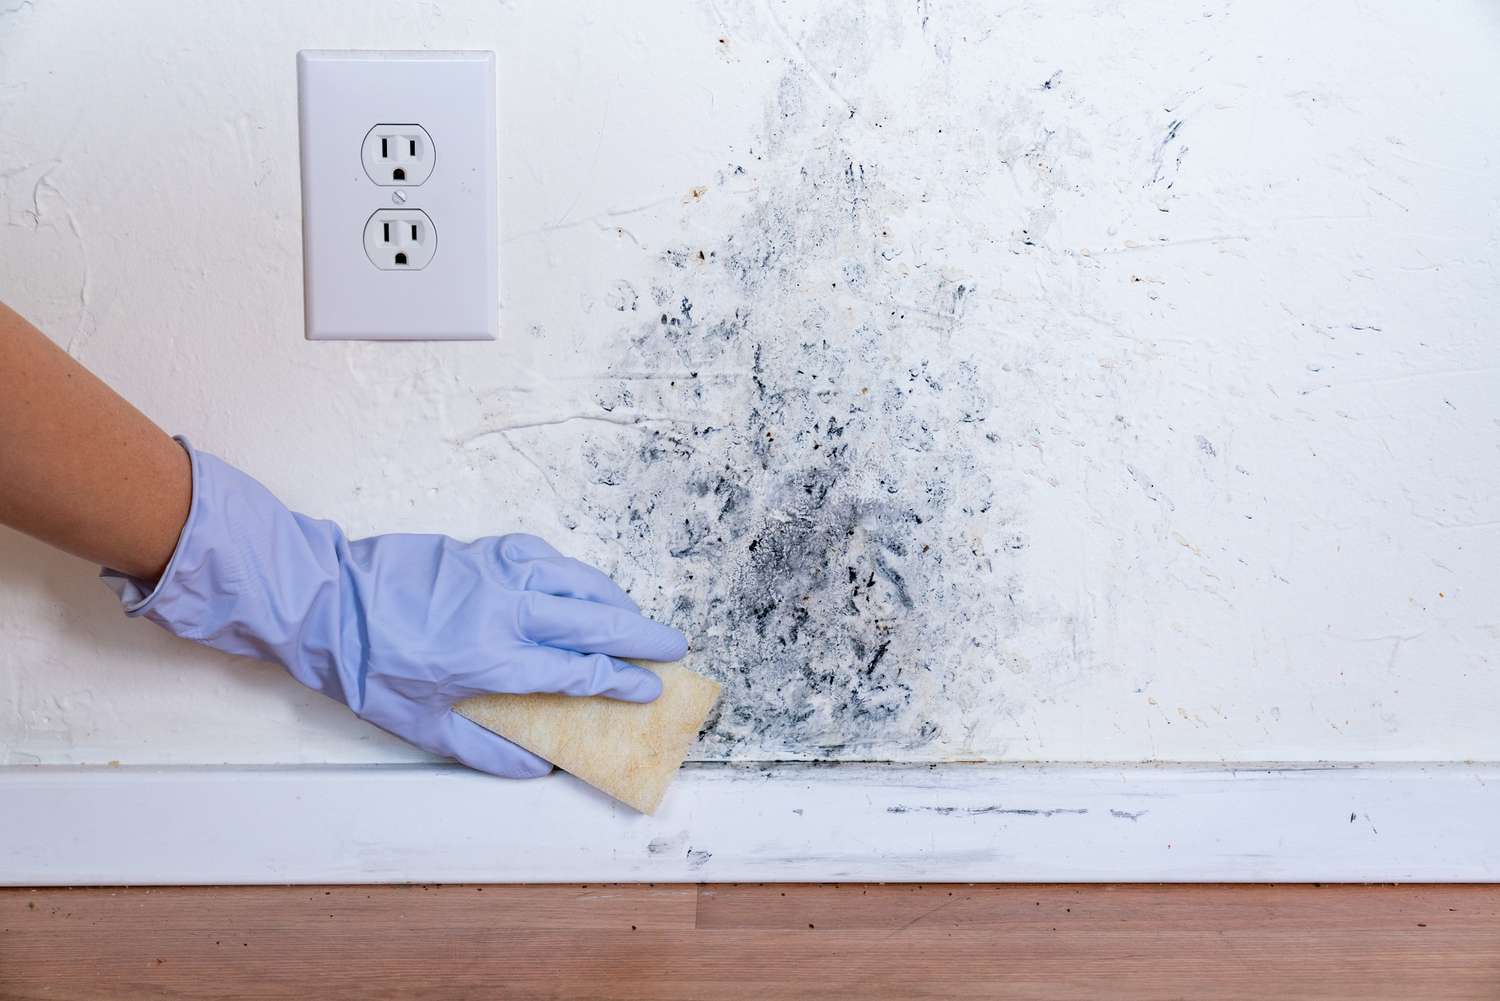 Mold penetrates walls in confined spaces like crawl spaces and may have a powdery appearance